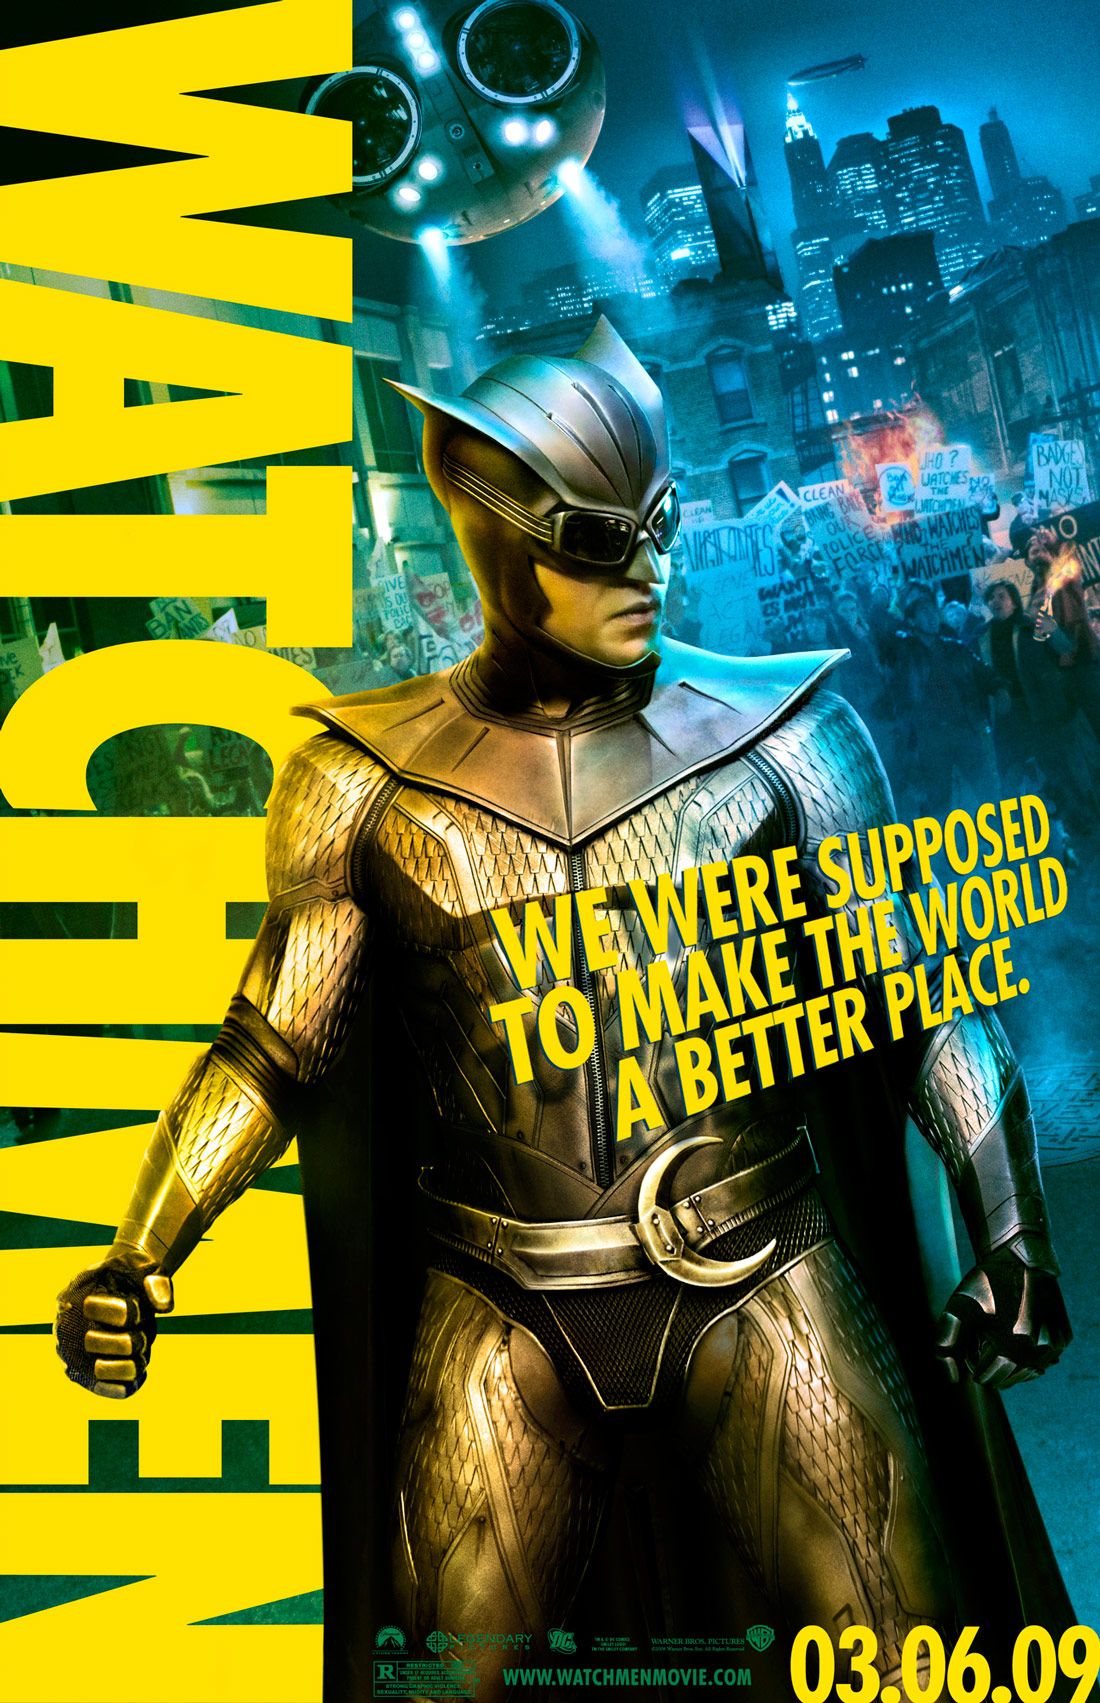 Watchmen Character Poster #5